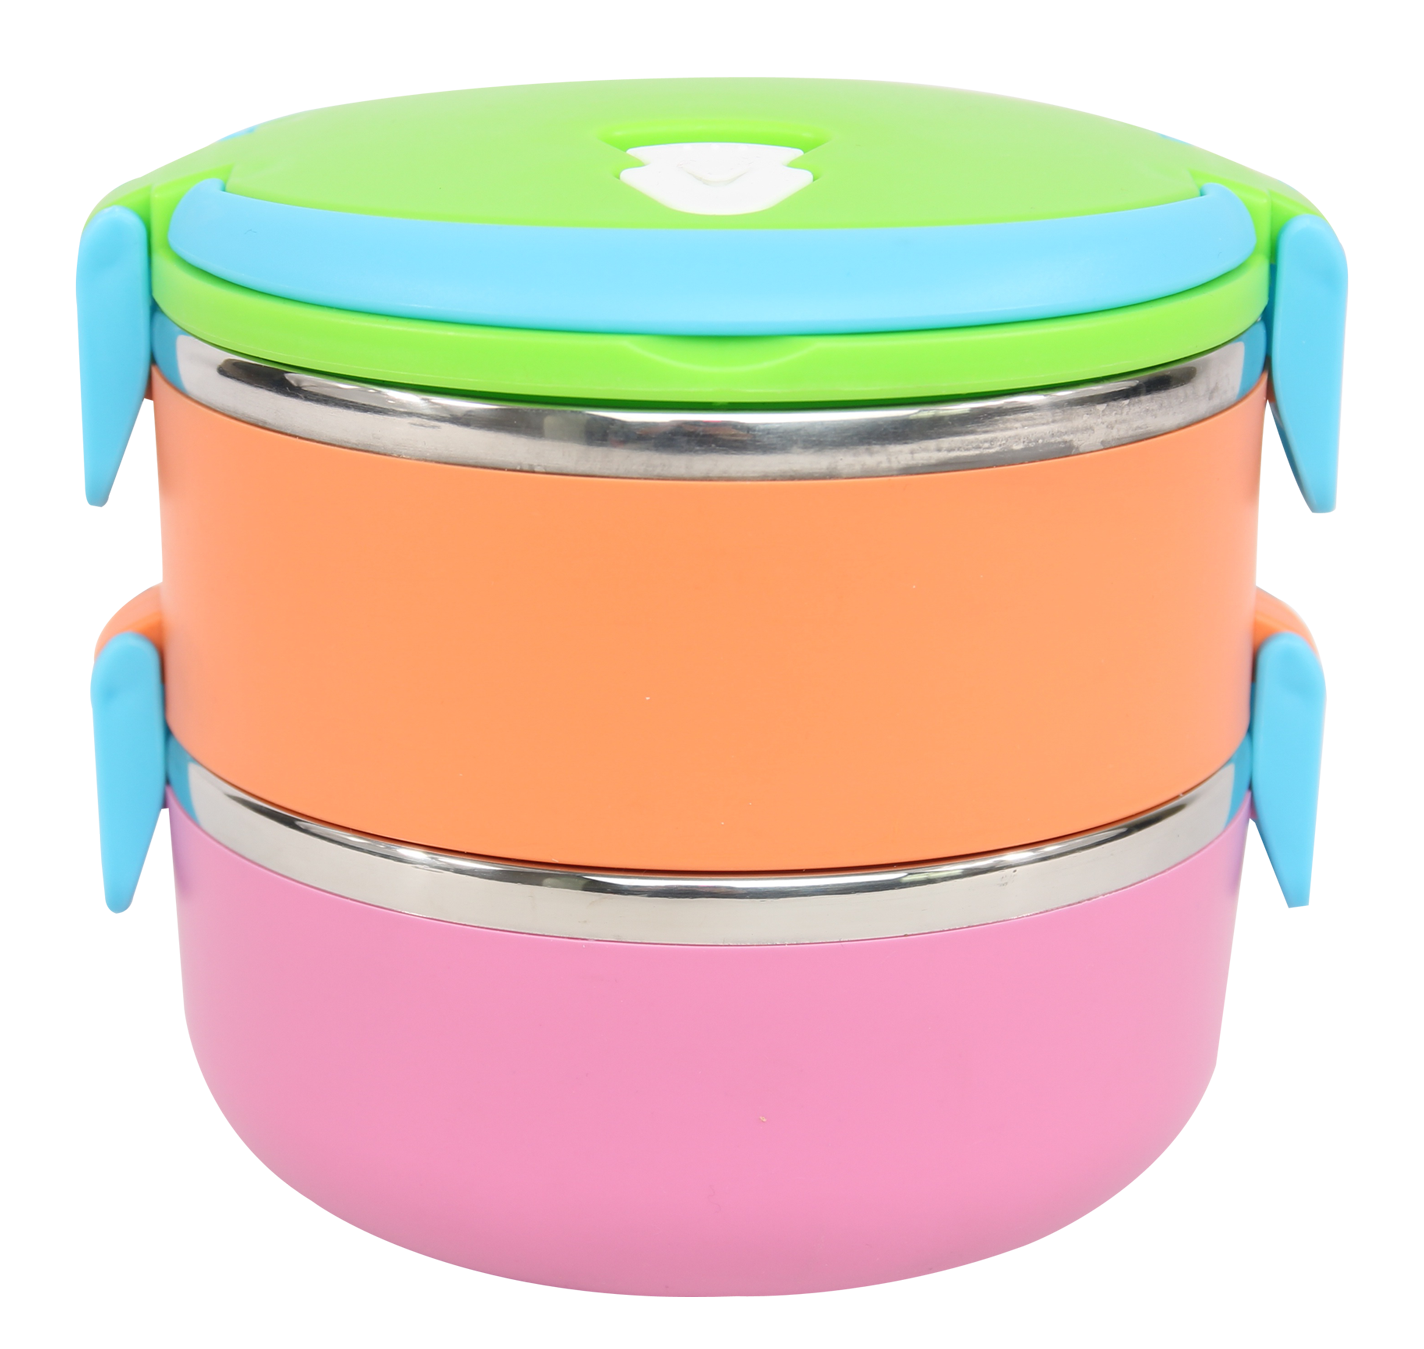 Lunch Box Png Transparent Image - Lunch Box, Transparent background PNG HD thumbnail